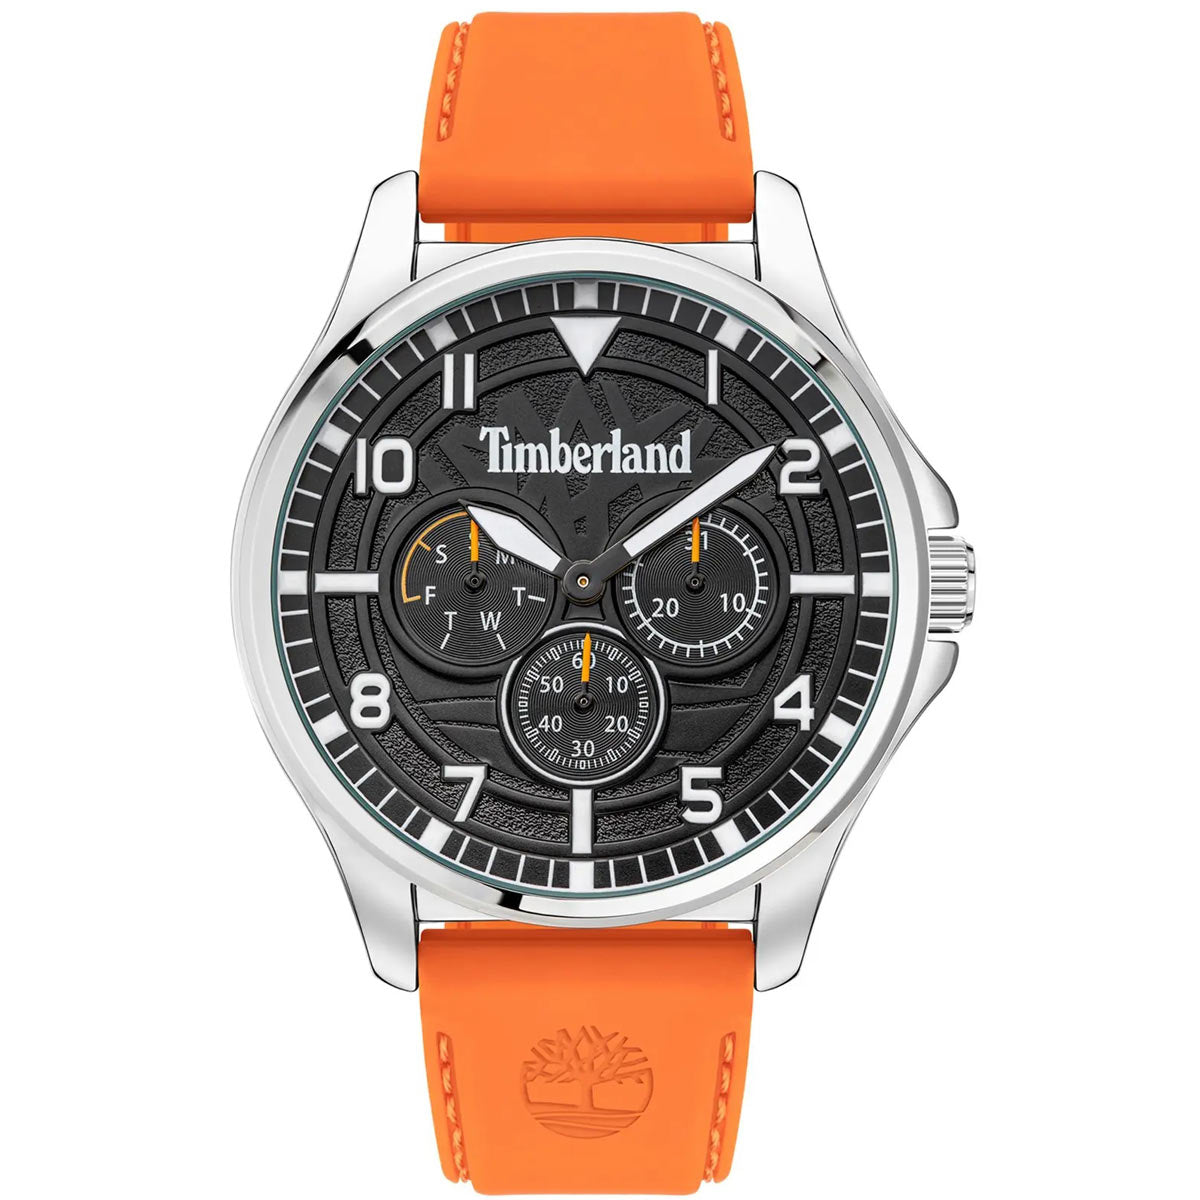 Timberland Men\'s Chronograph Watch - Orange Silicone Rubber Strap | TD